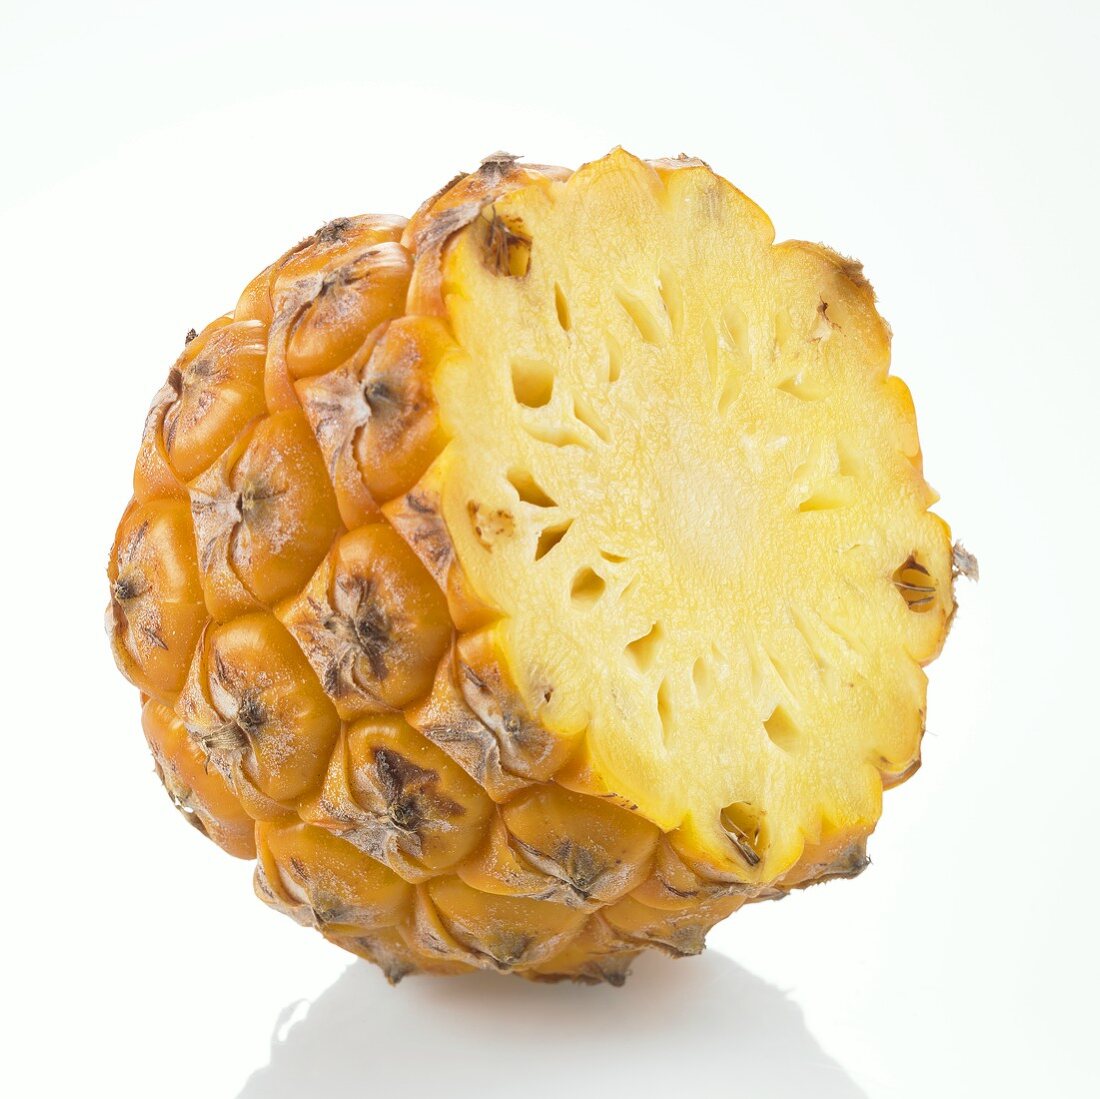 Baby pineapple, a piece